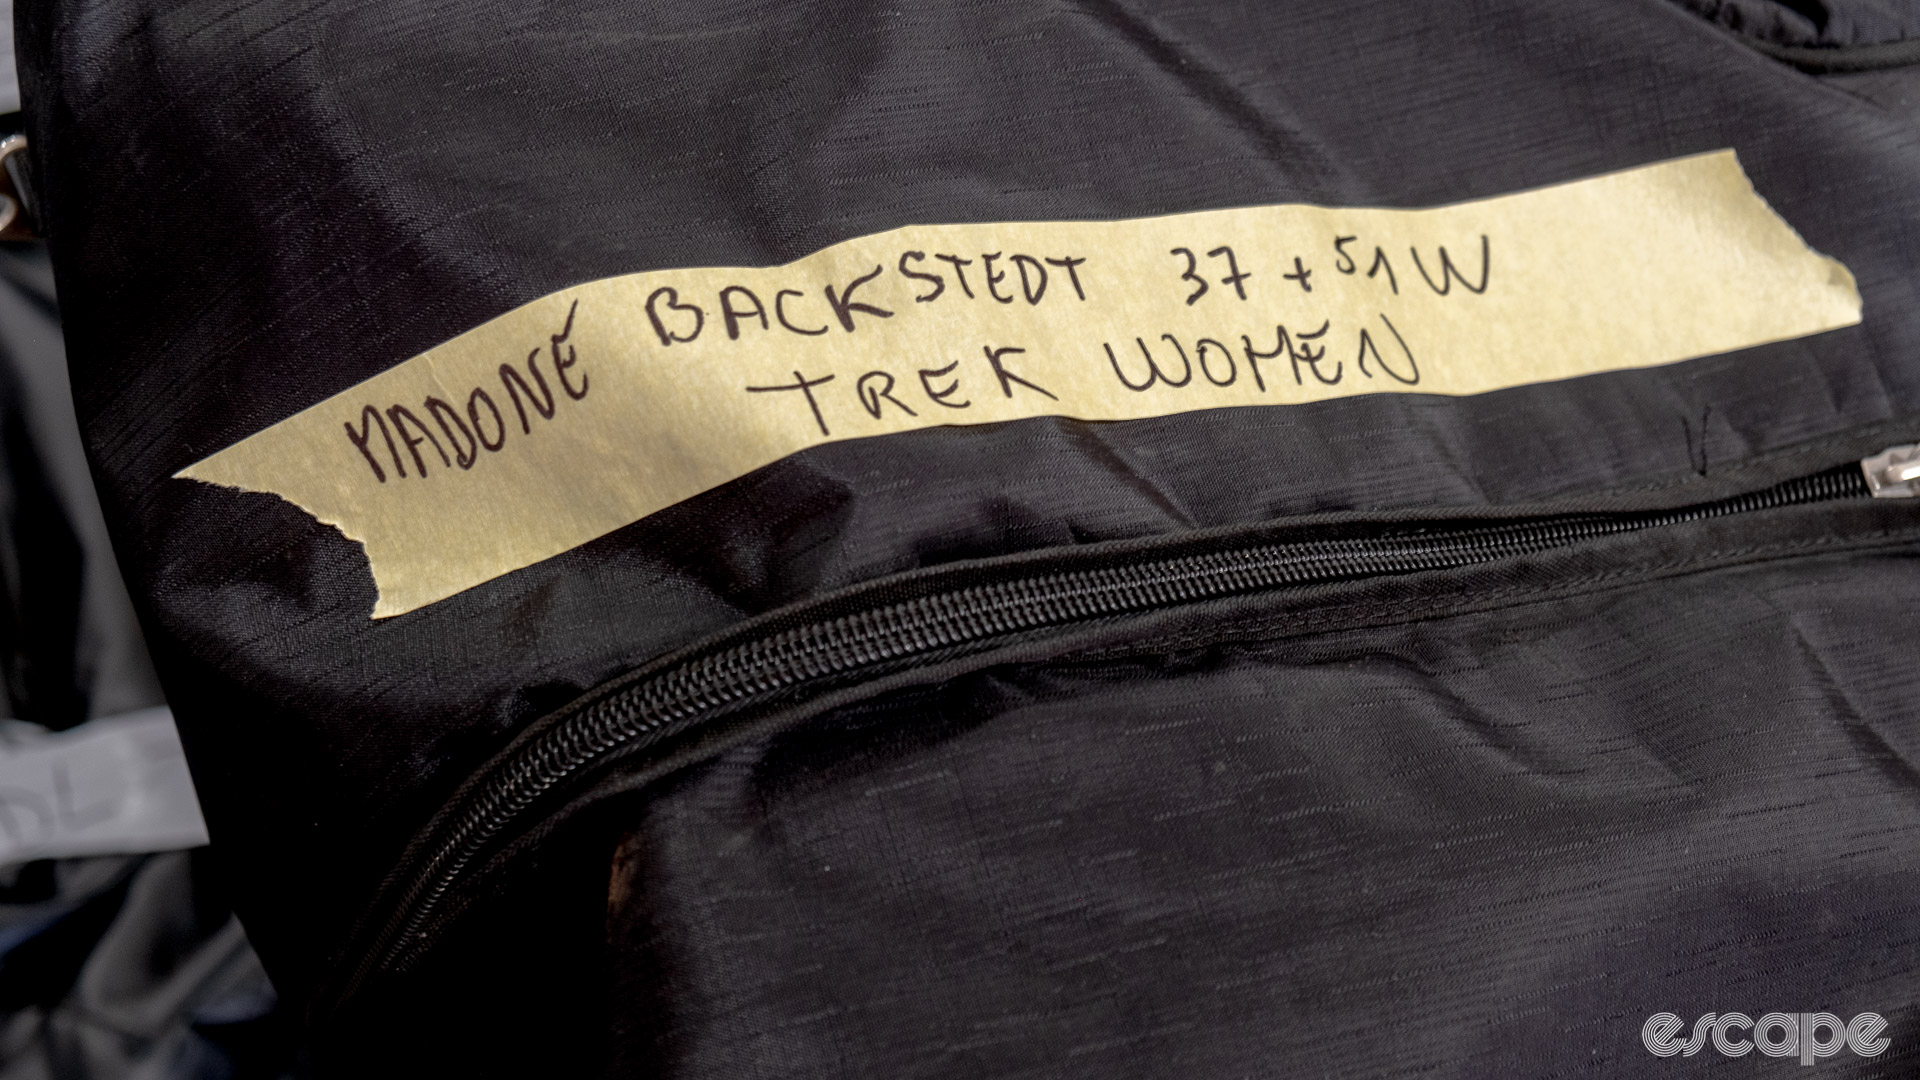 The photo shows a label noting Elynor Backstedt's Trek Madone is packed in this bag. 